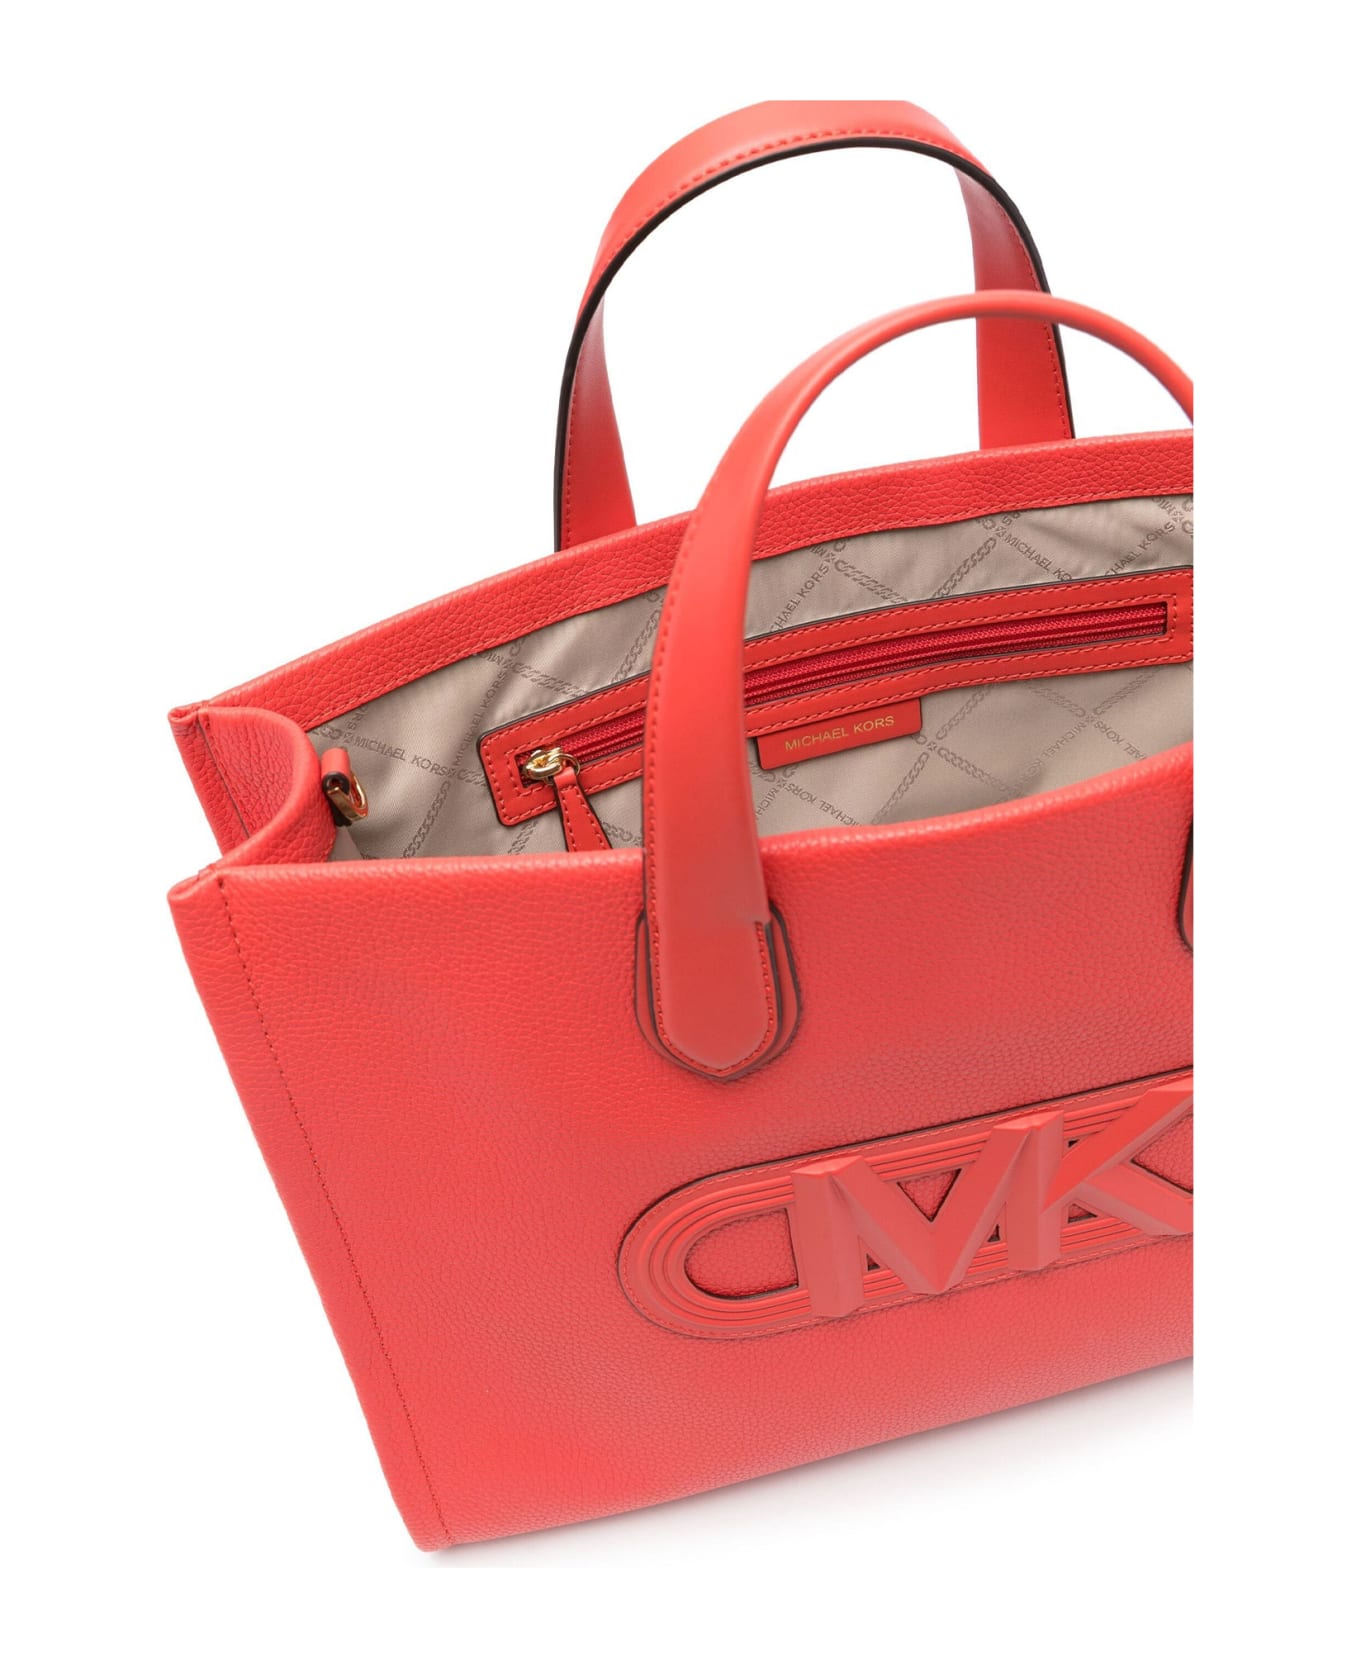 Michael Kors Large Tote Bag With Logo - SPICED CORAL